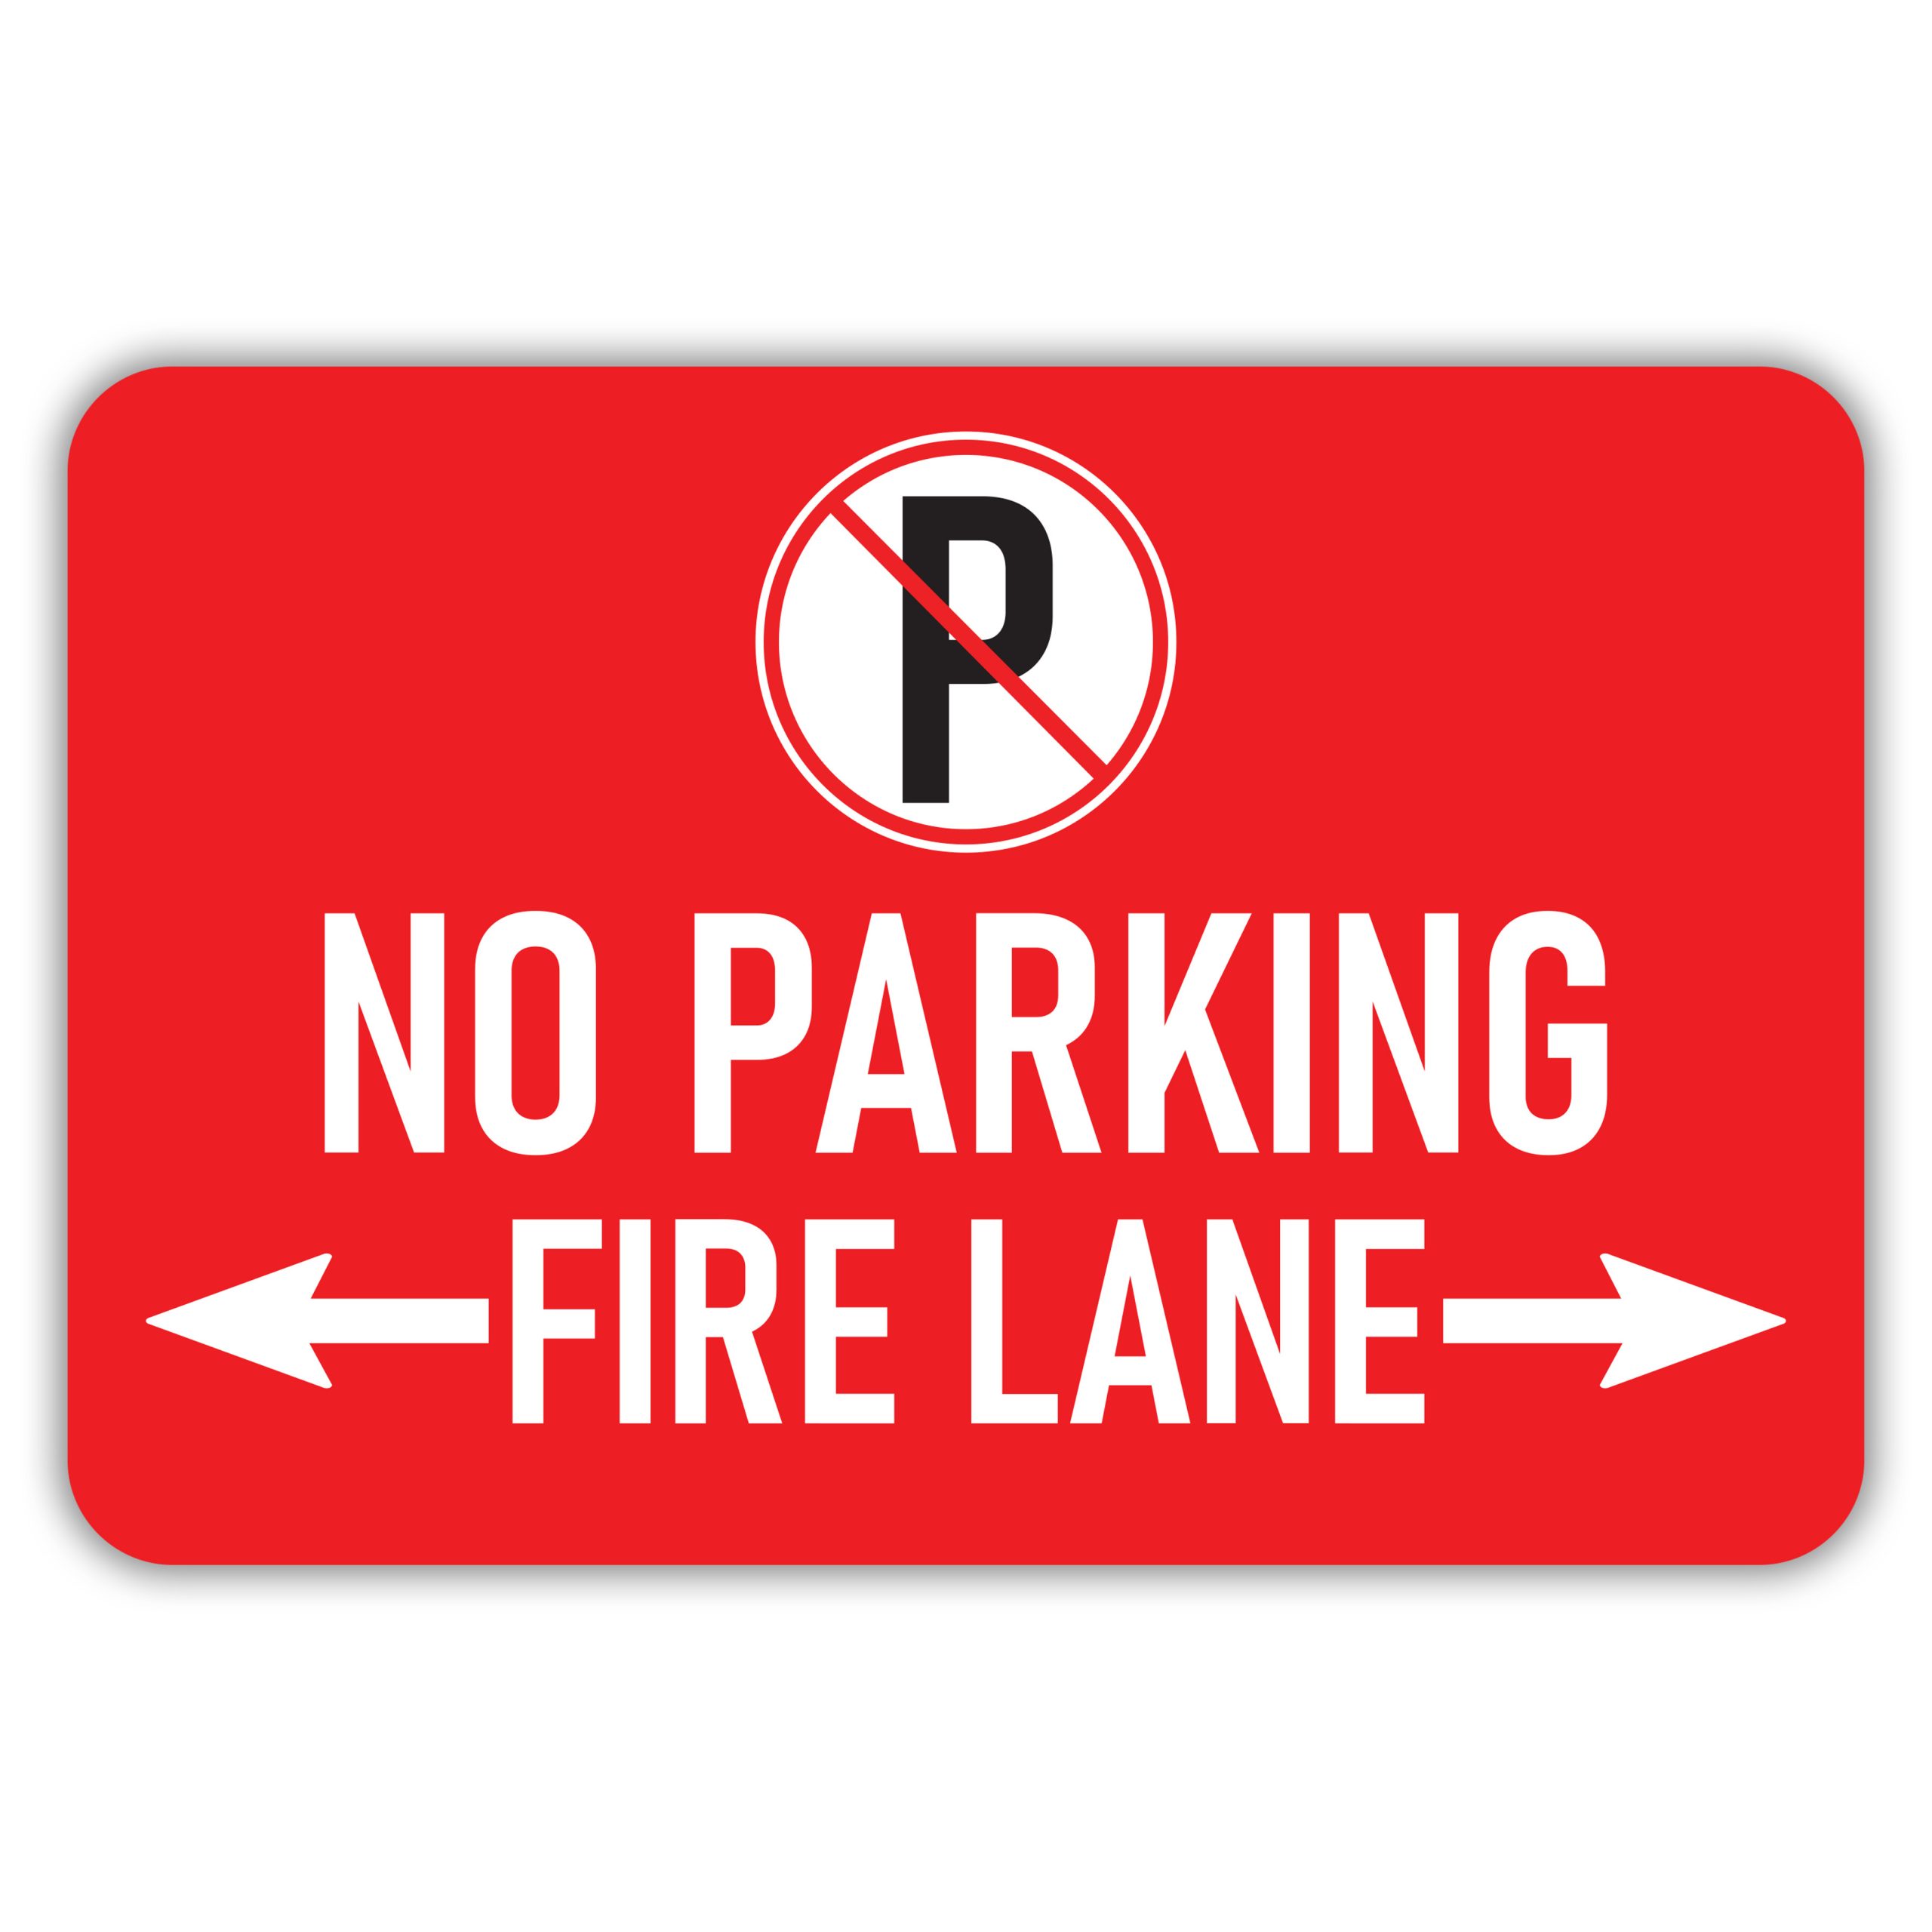 (NO PARKING) NO PARKING FIRE LANE - American Sign Company